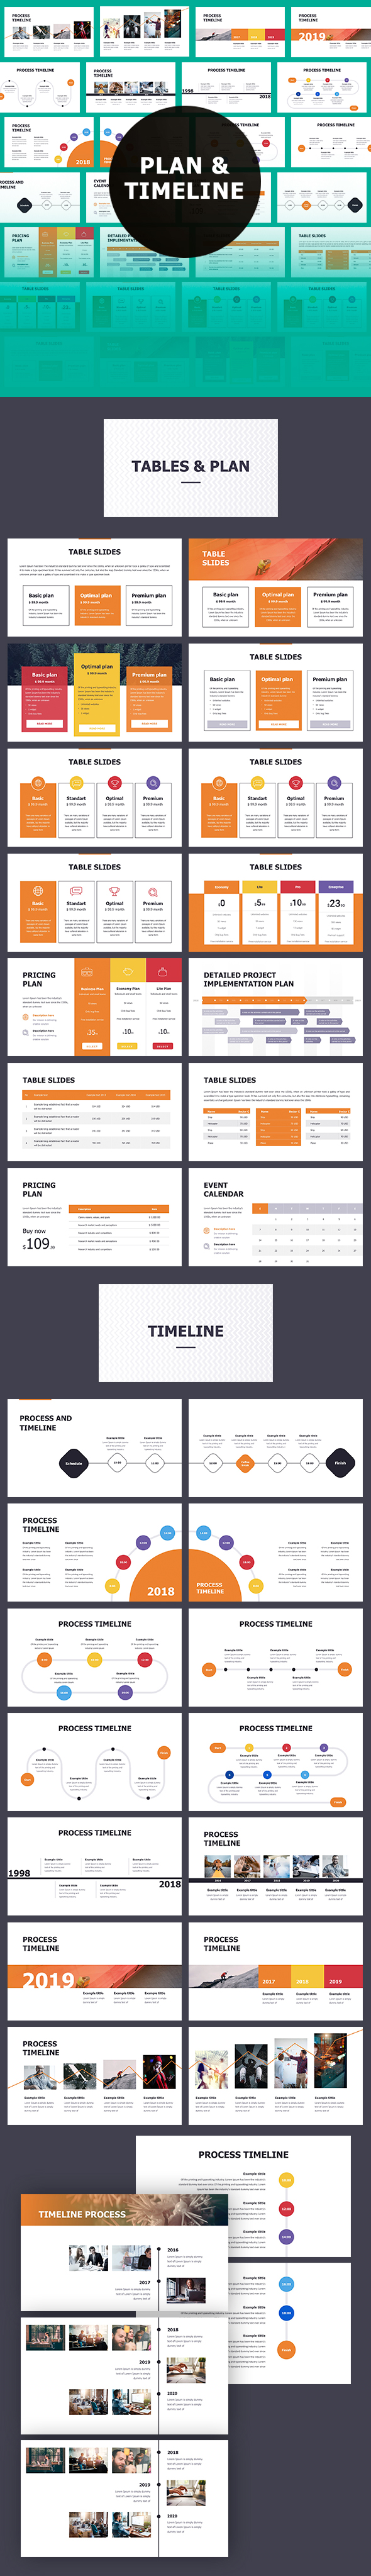 Timeline Powerpoint Themes